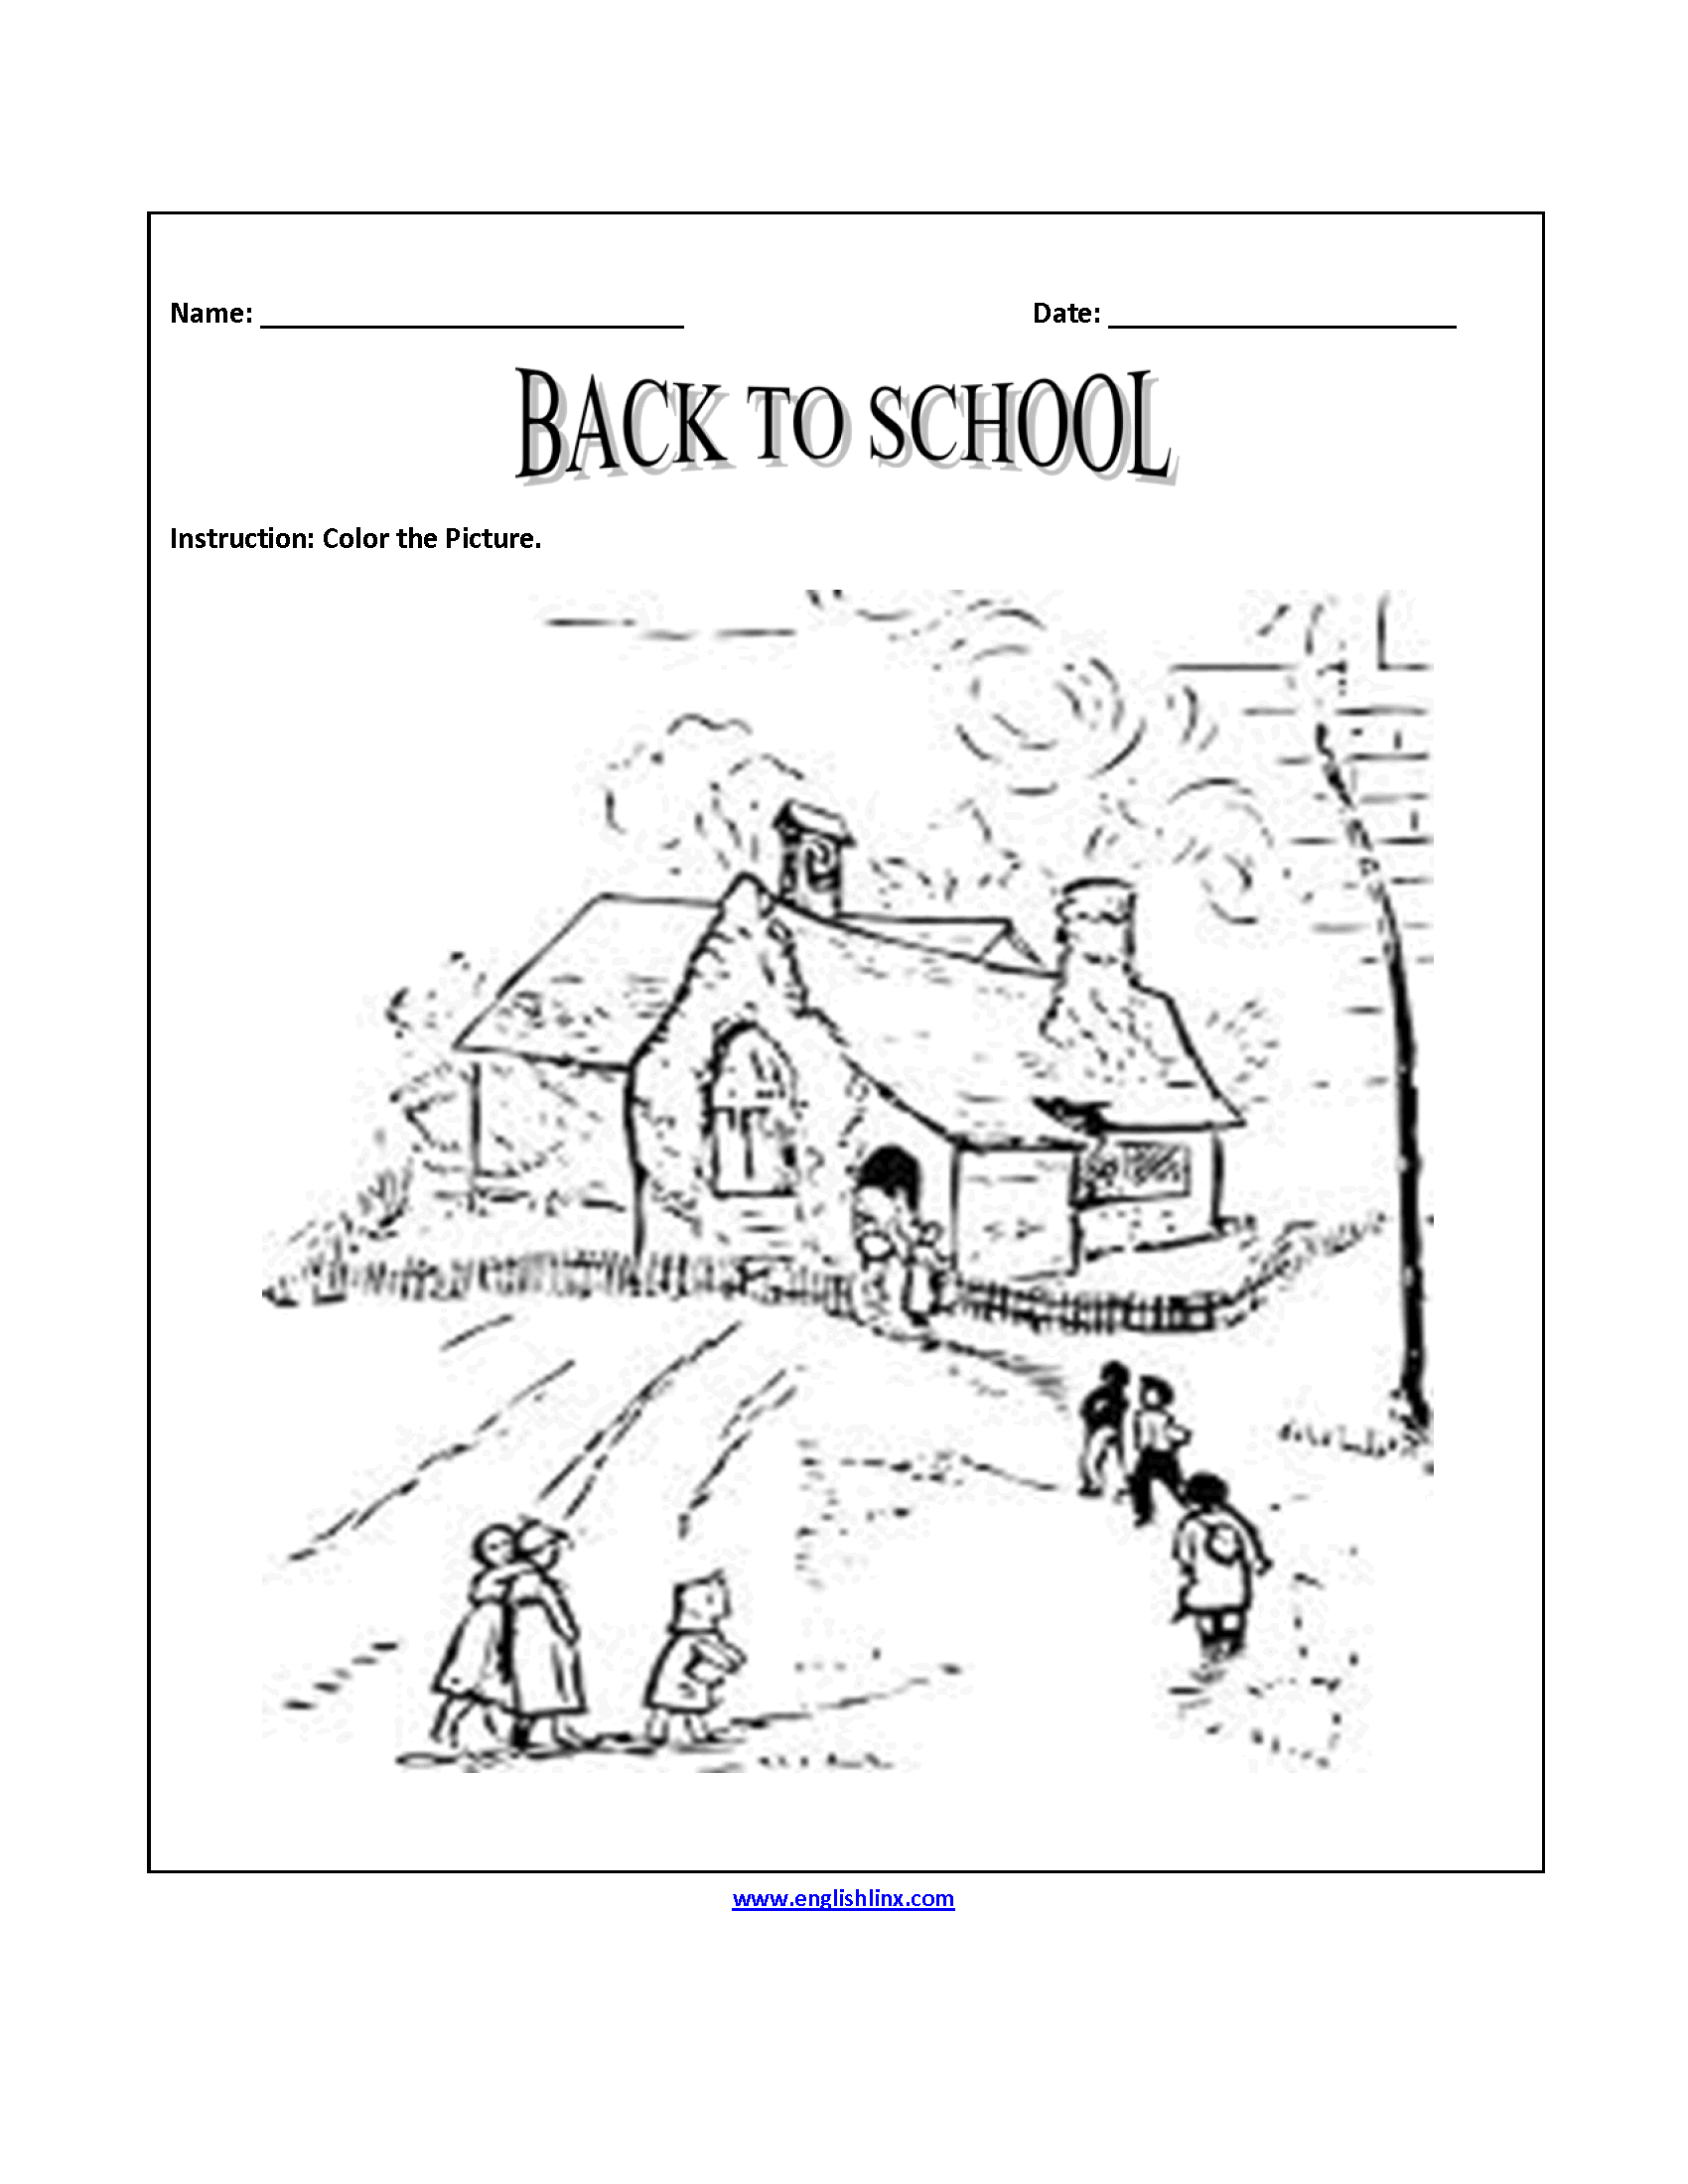 Back to School Coloring Page Worksheets